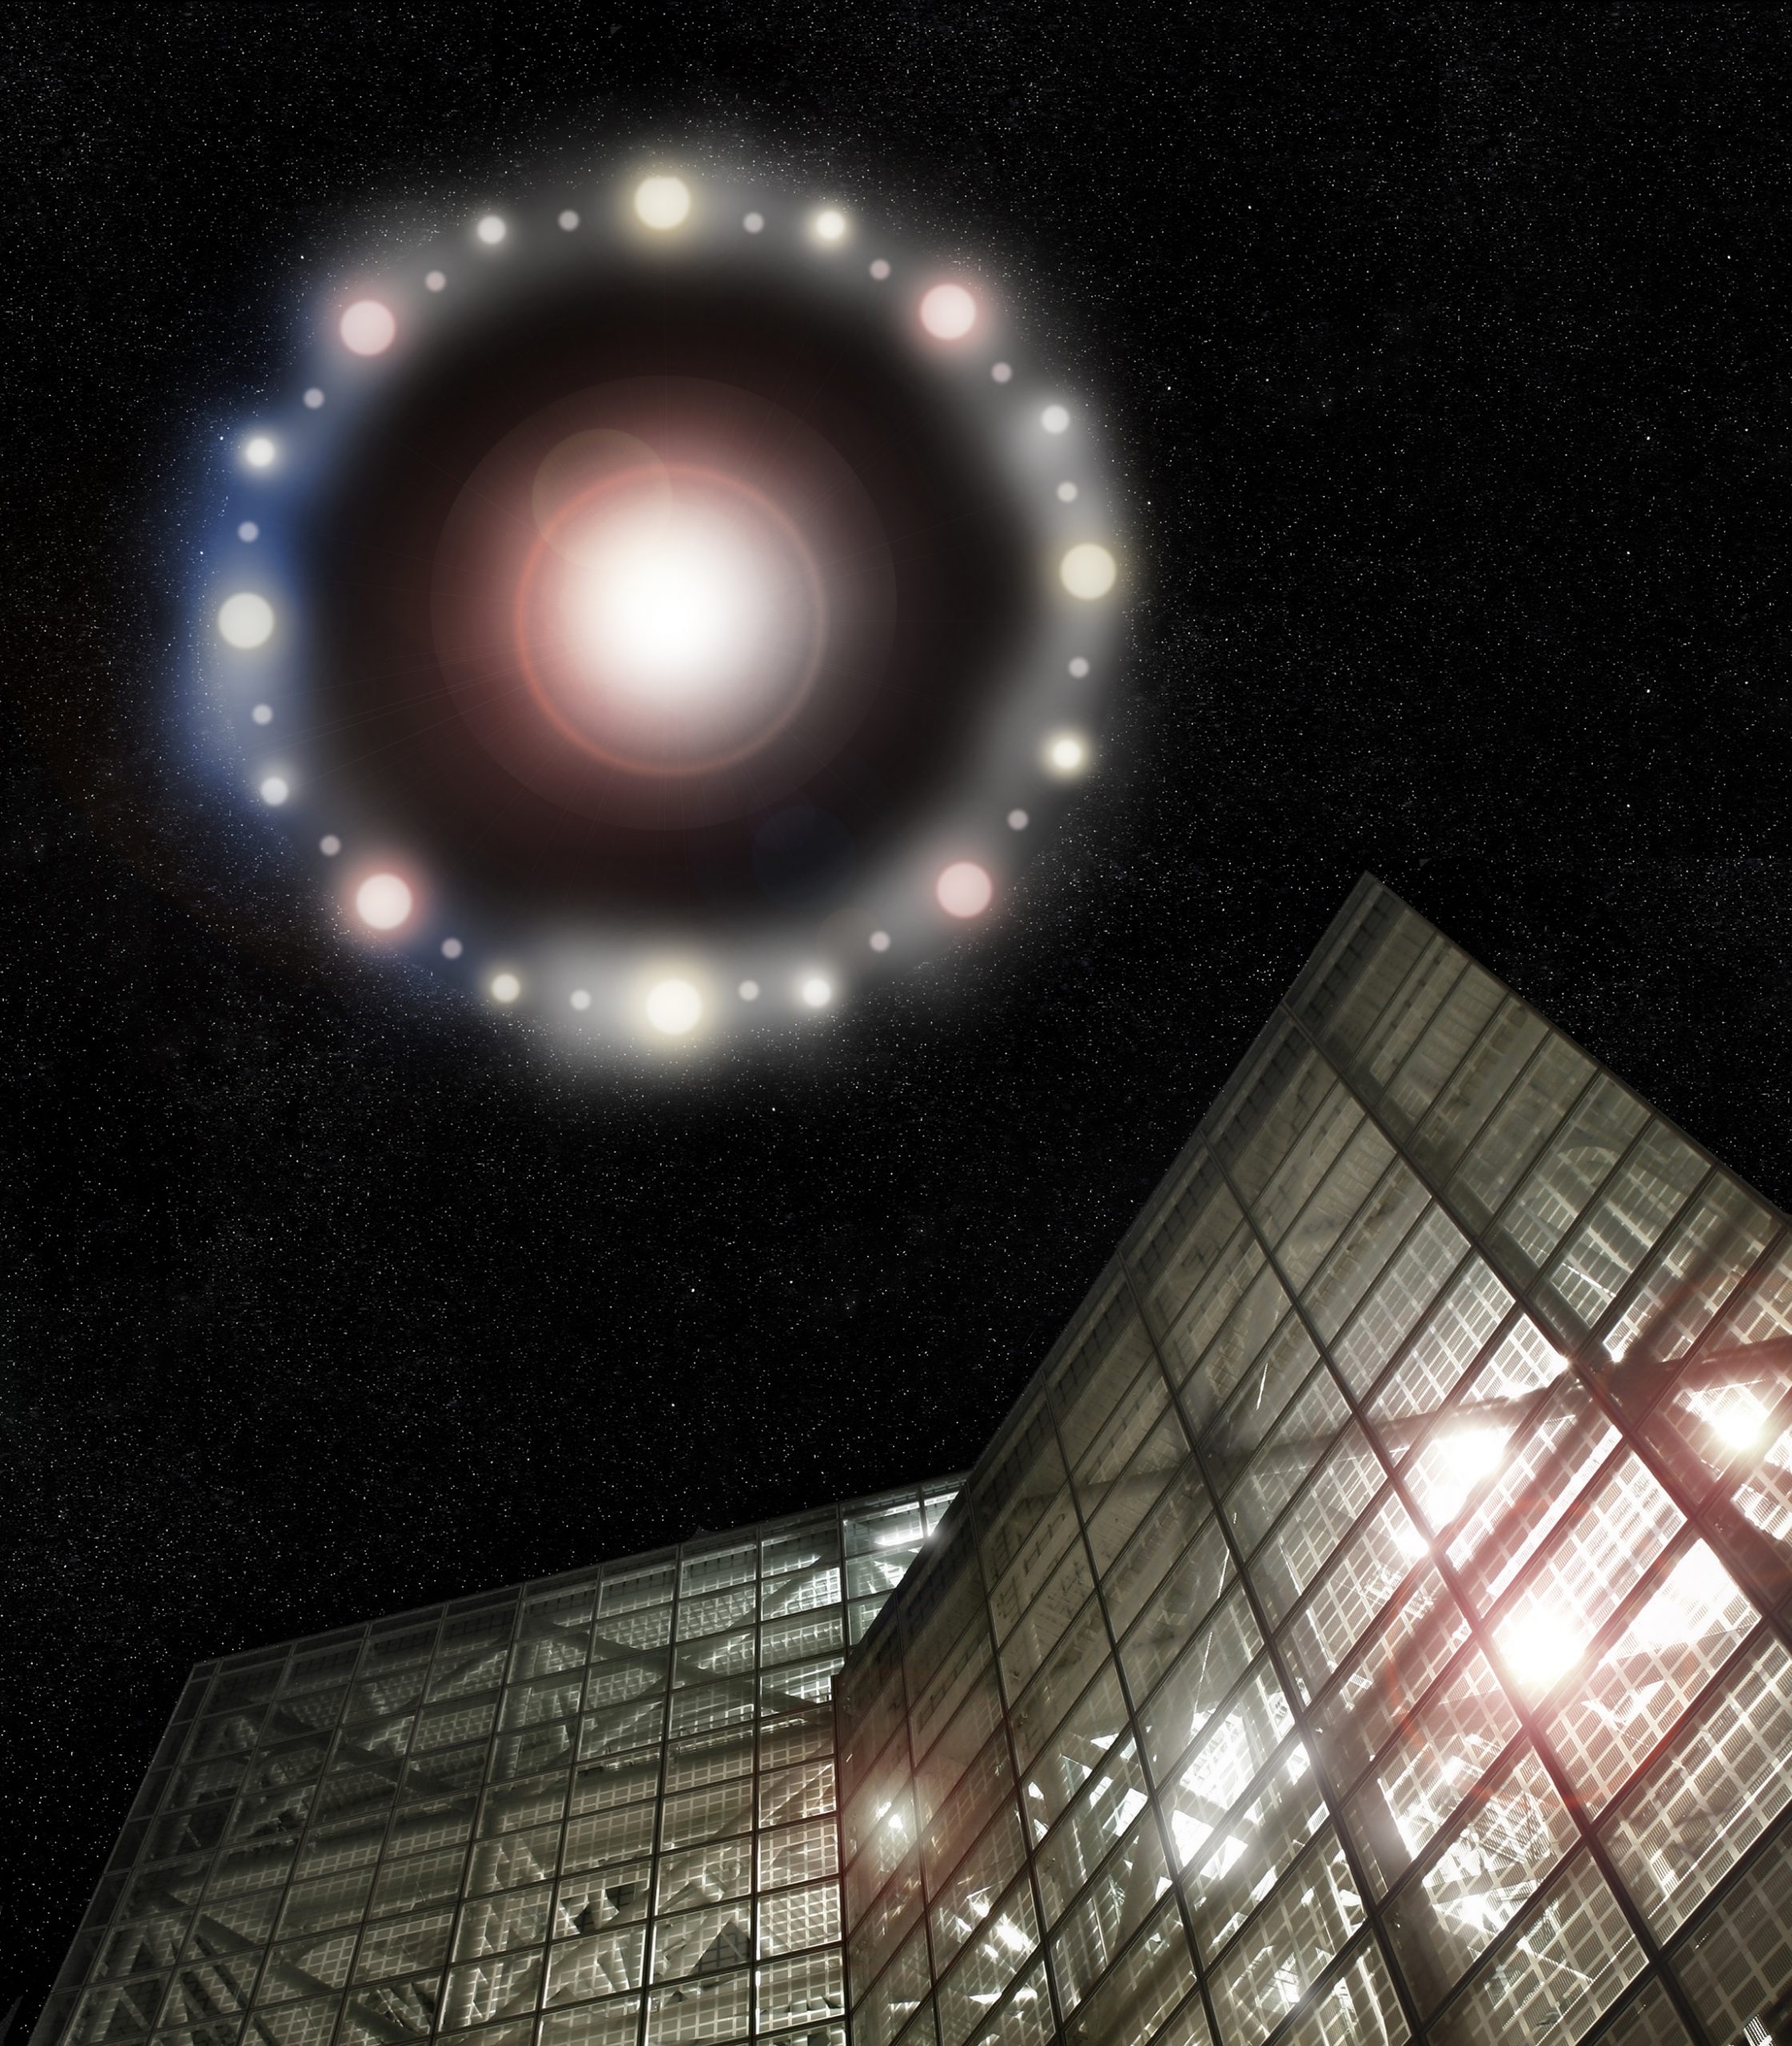 Huge glowing UFO hovering over a building. Depositphotos.